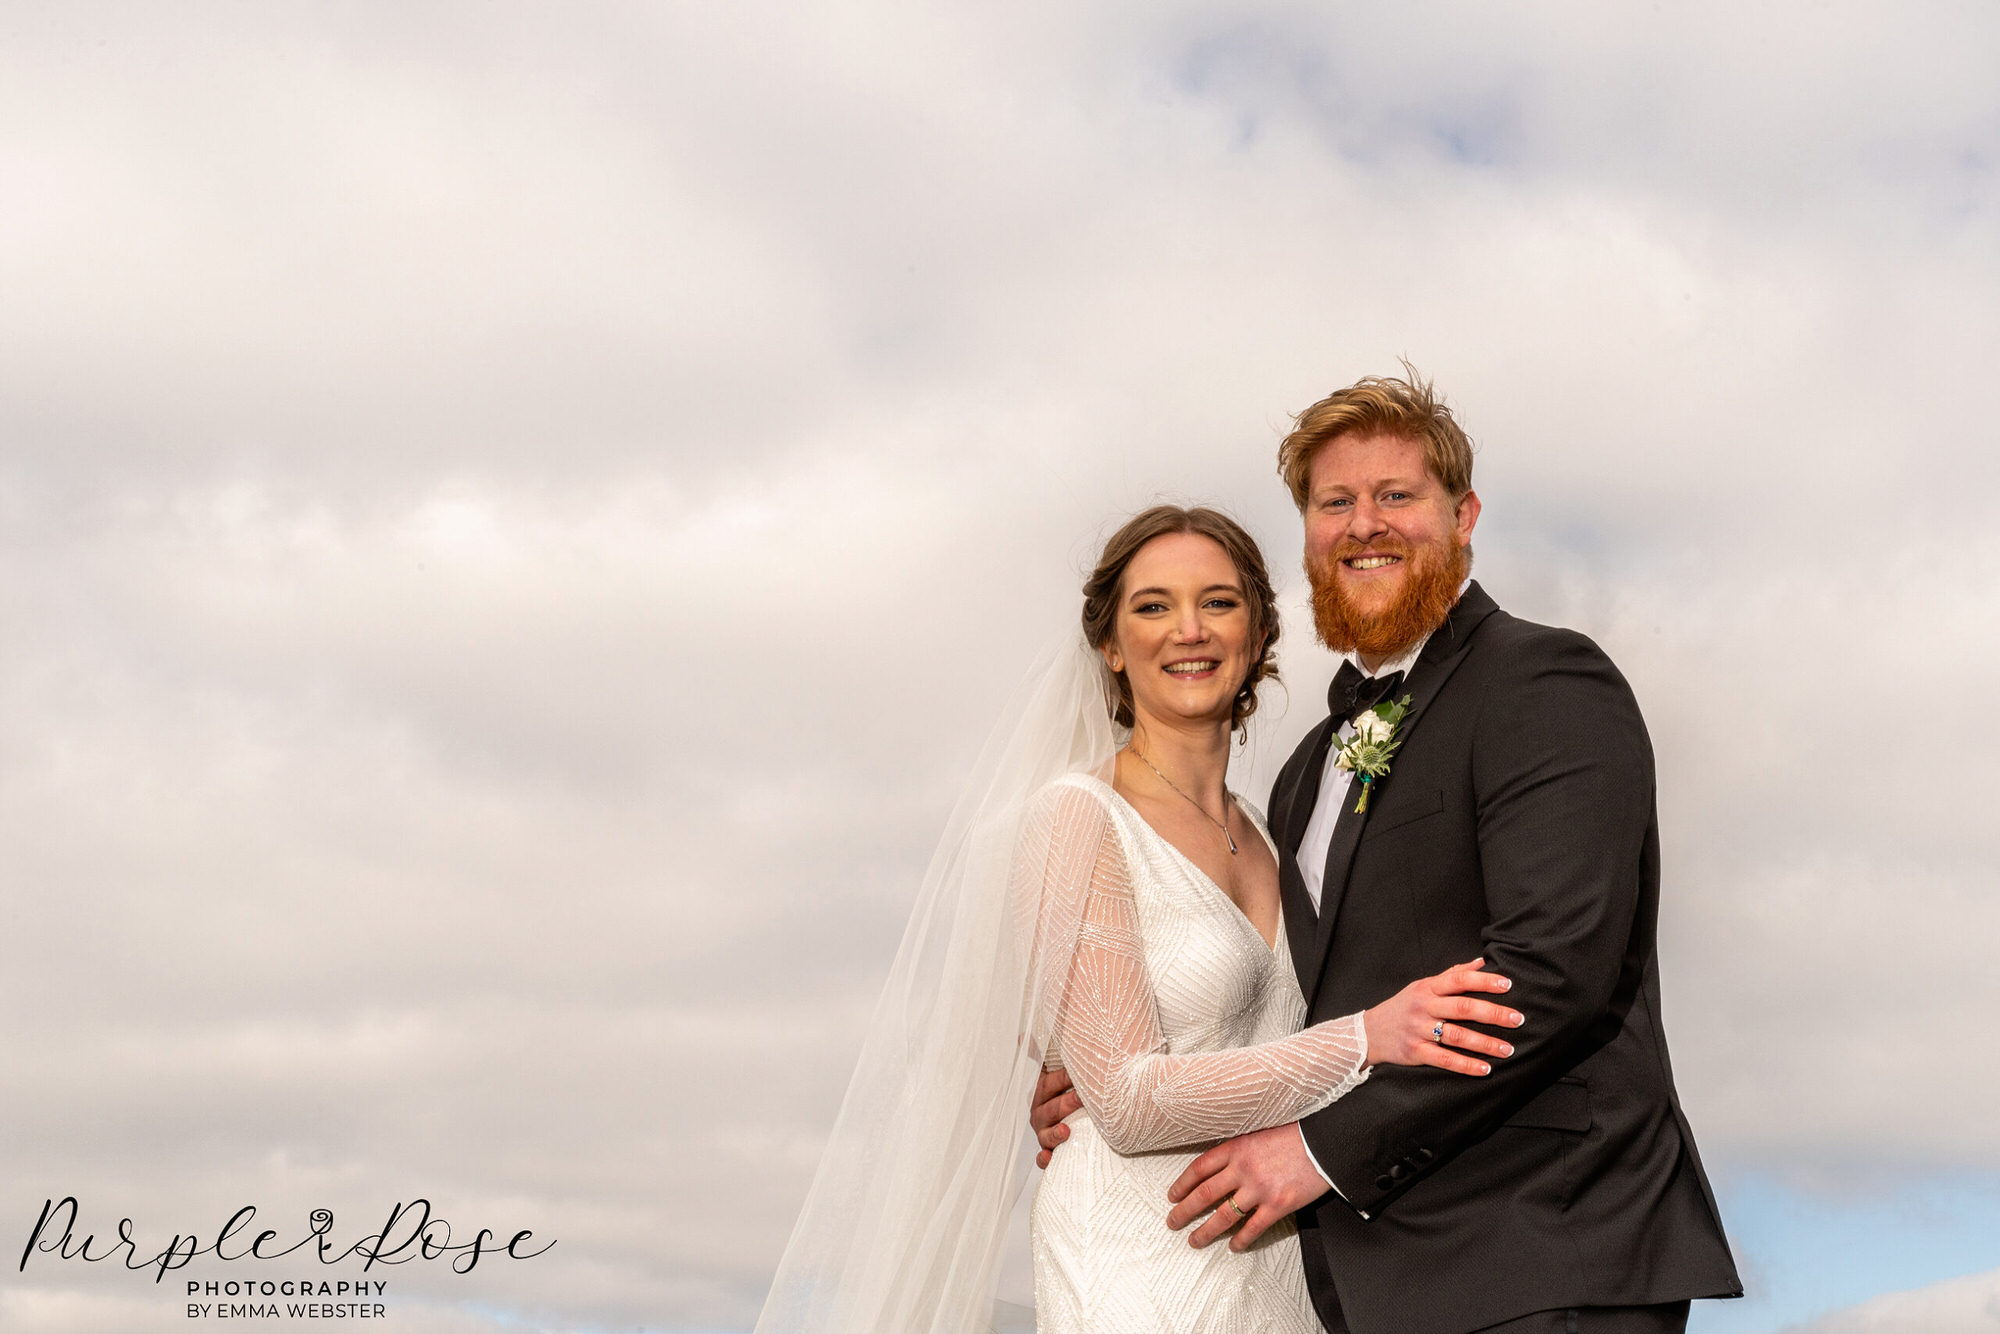 Photograph of a bride and groom on a cloudy day outside on their wedding day in Milton Keynes